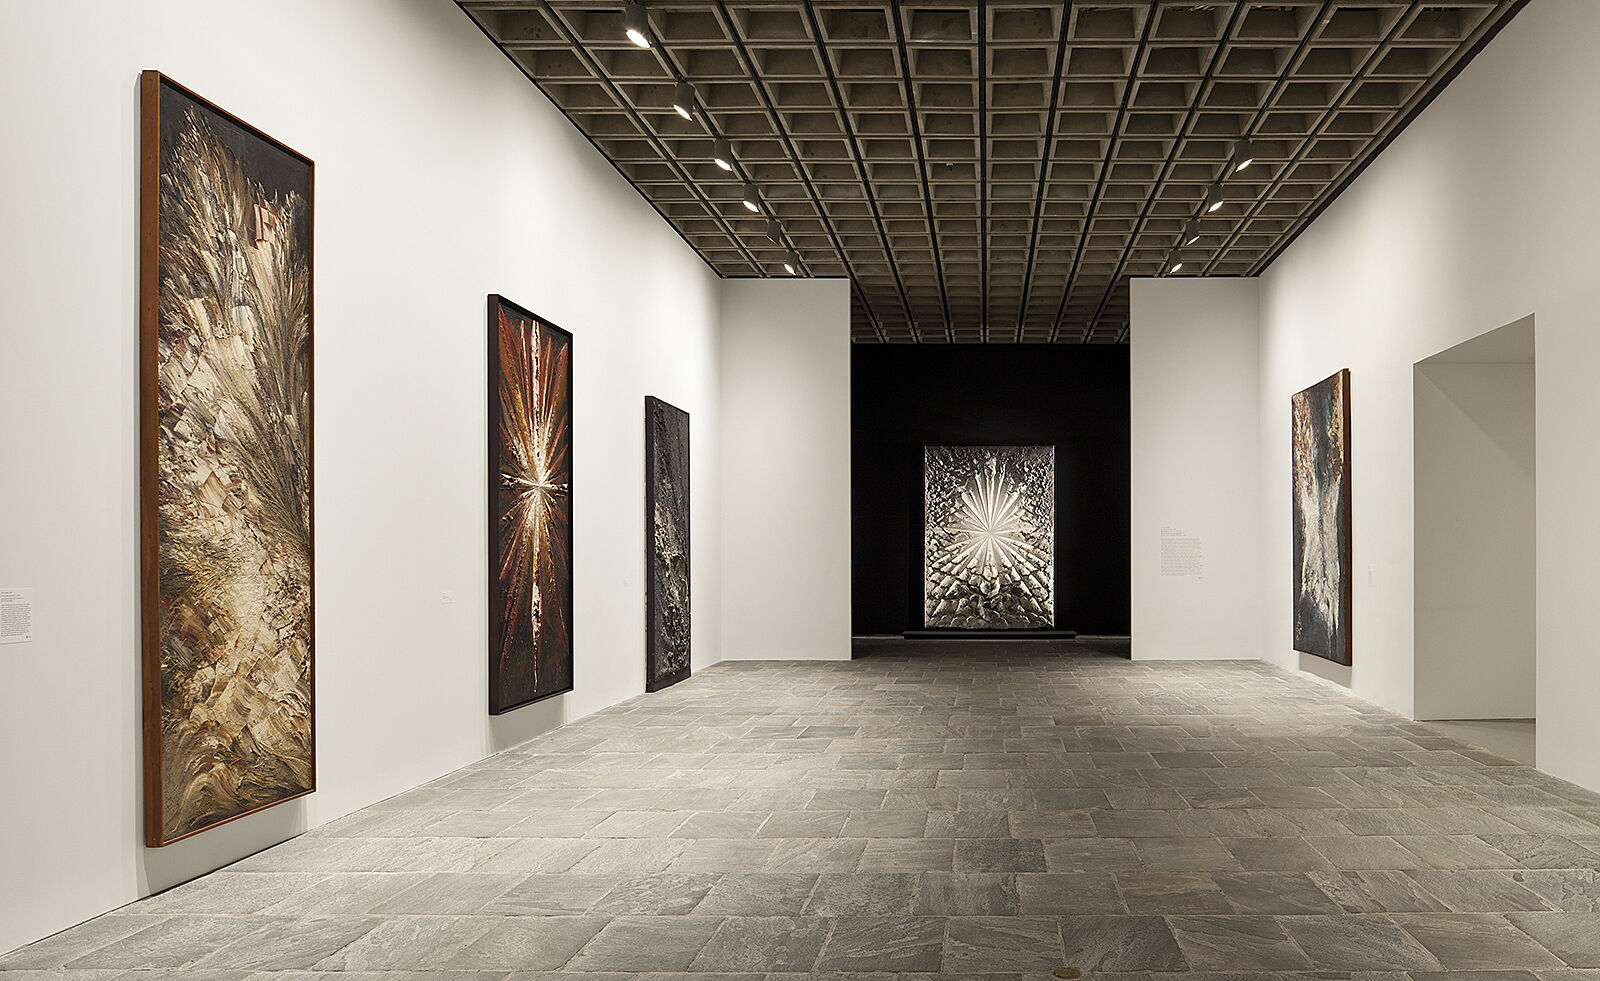 Large artworks housed in an illuminated gallery.